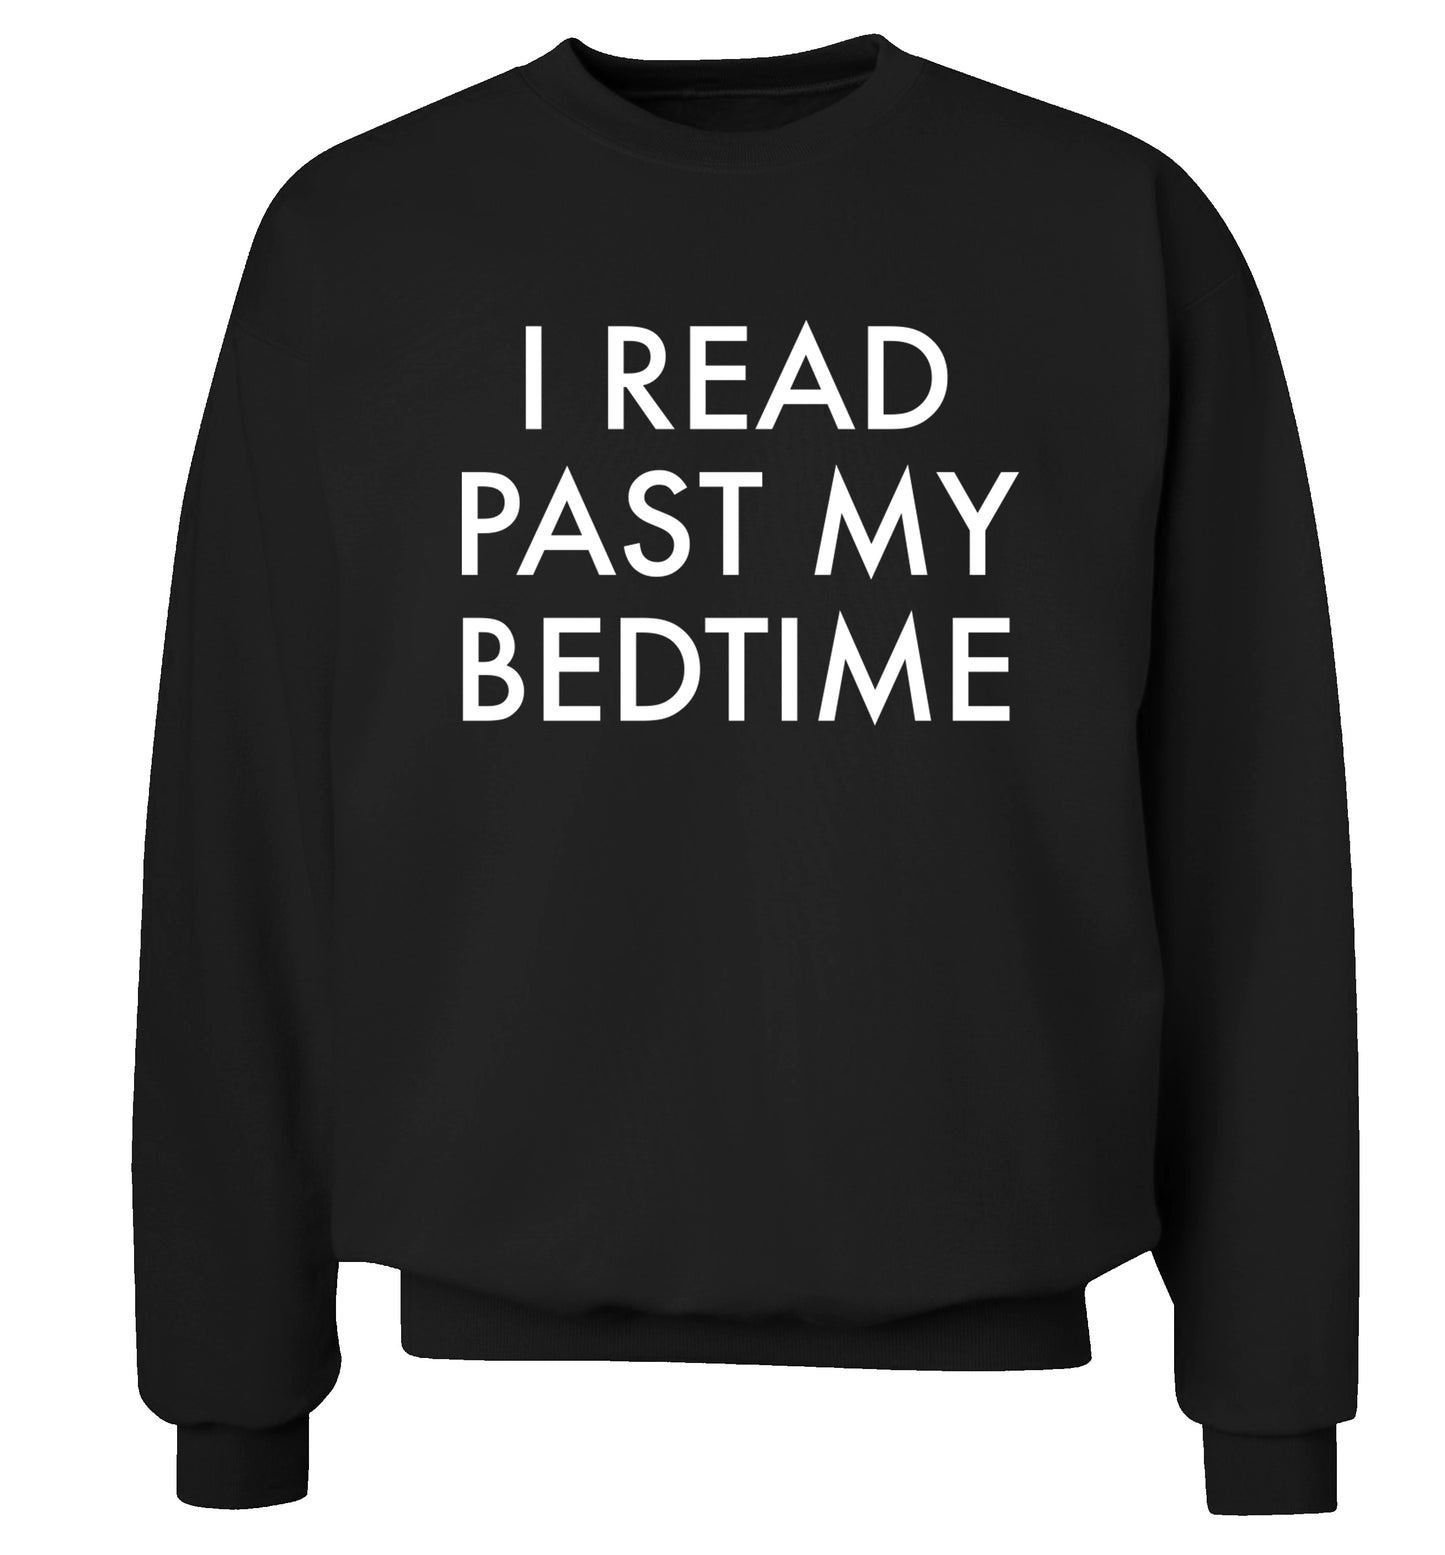 I read past my bedtime Adult's unisex black Sweater 2XL